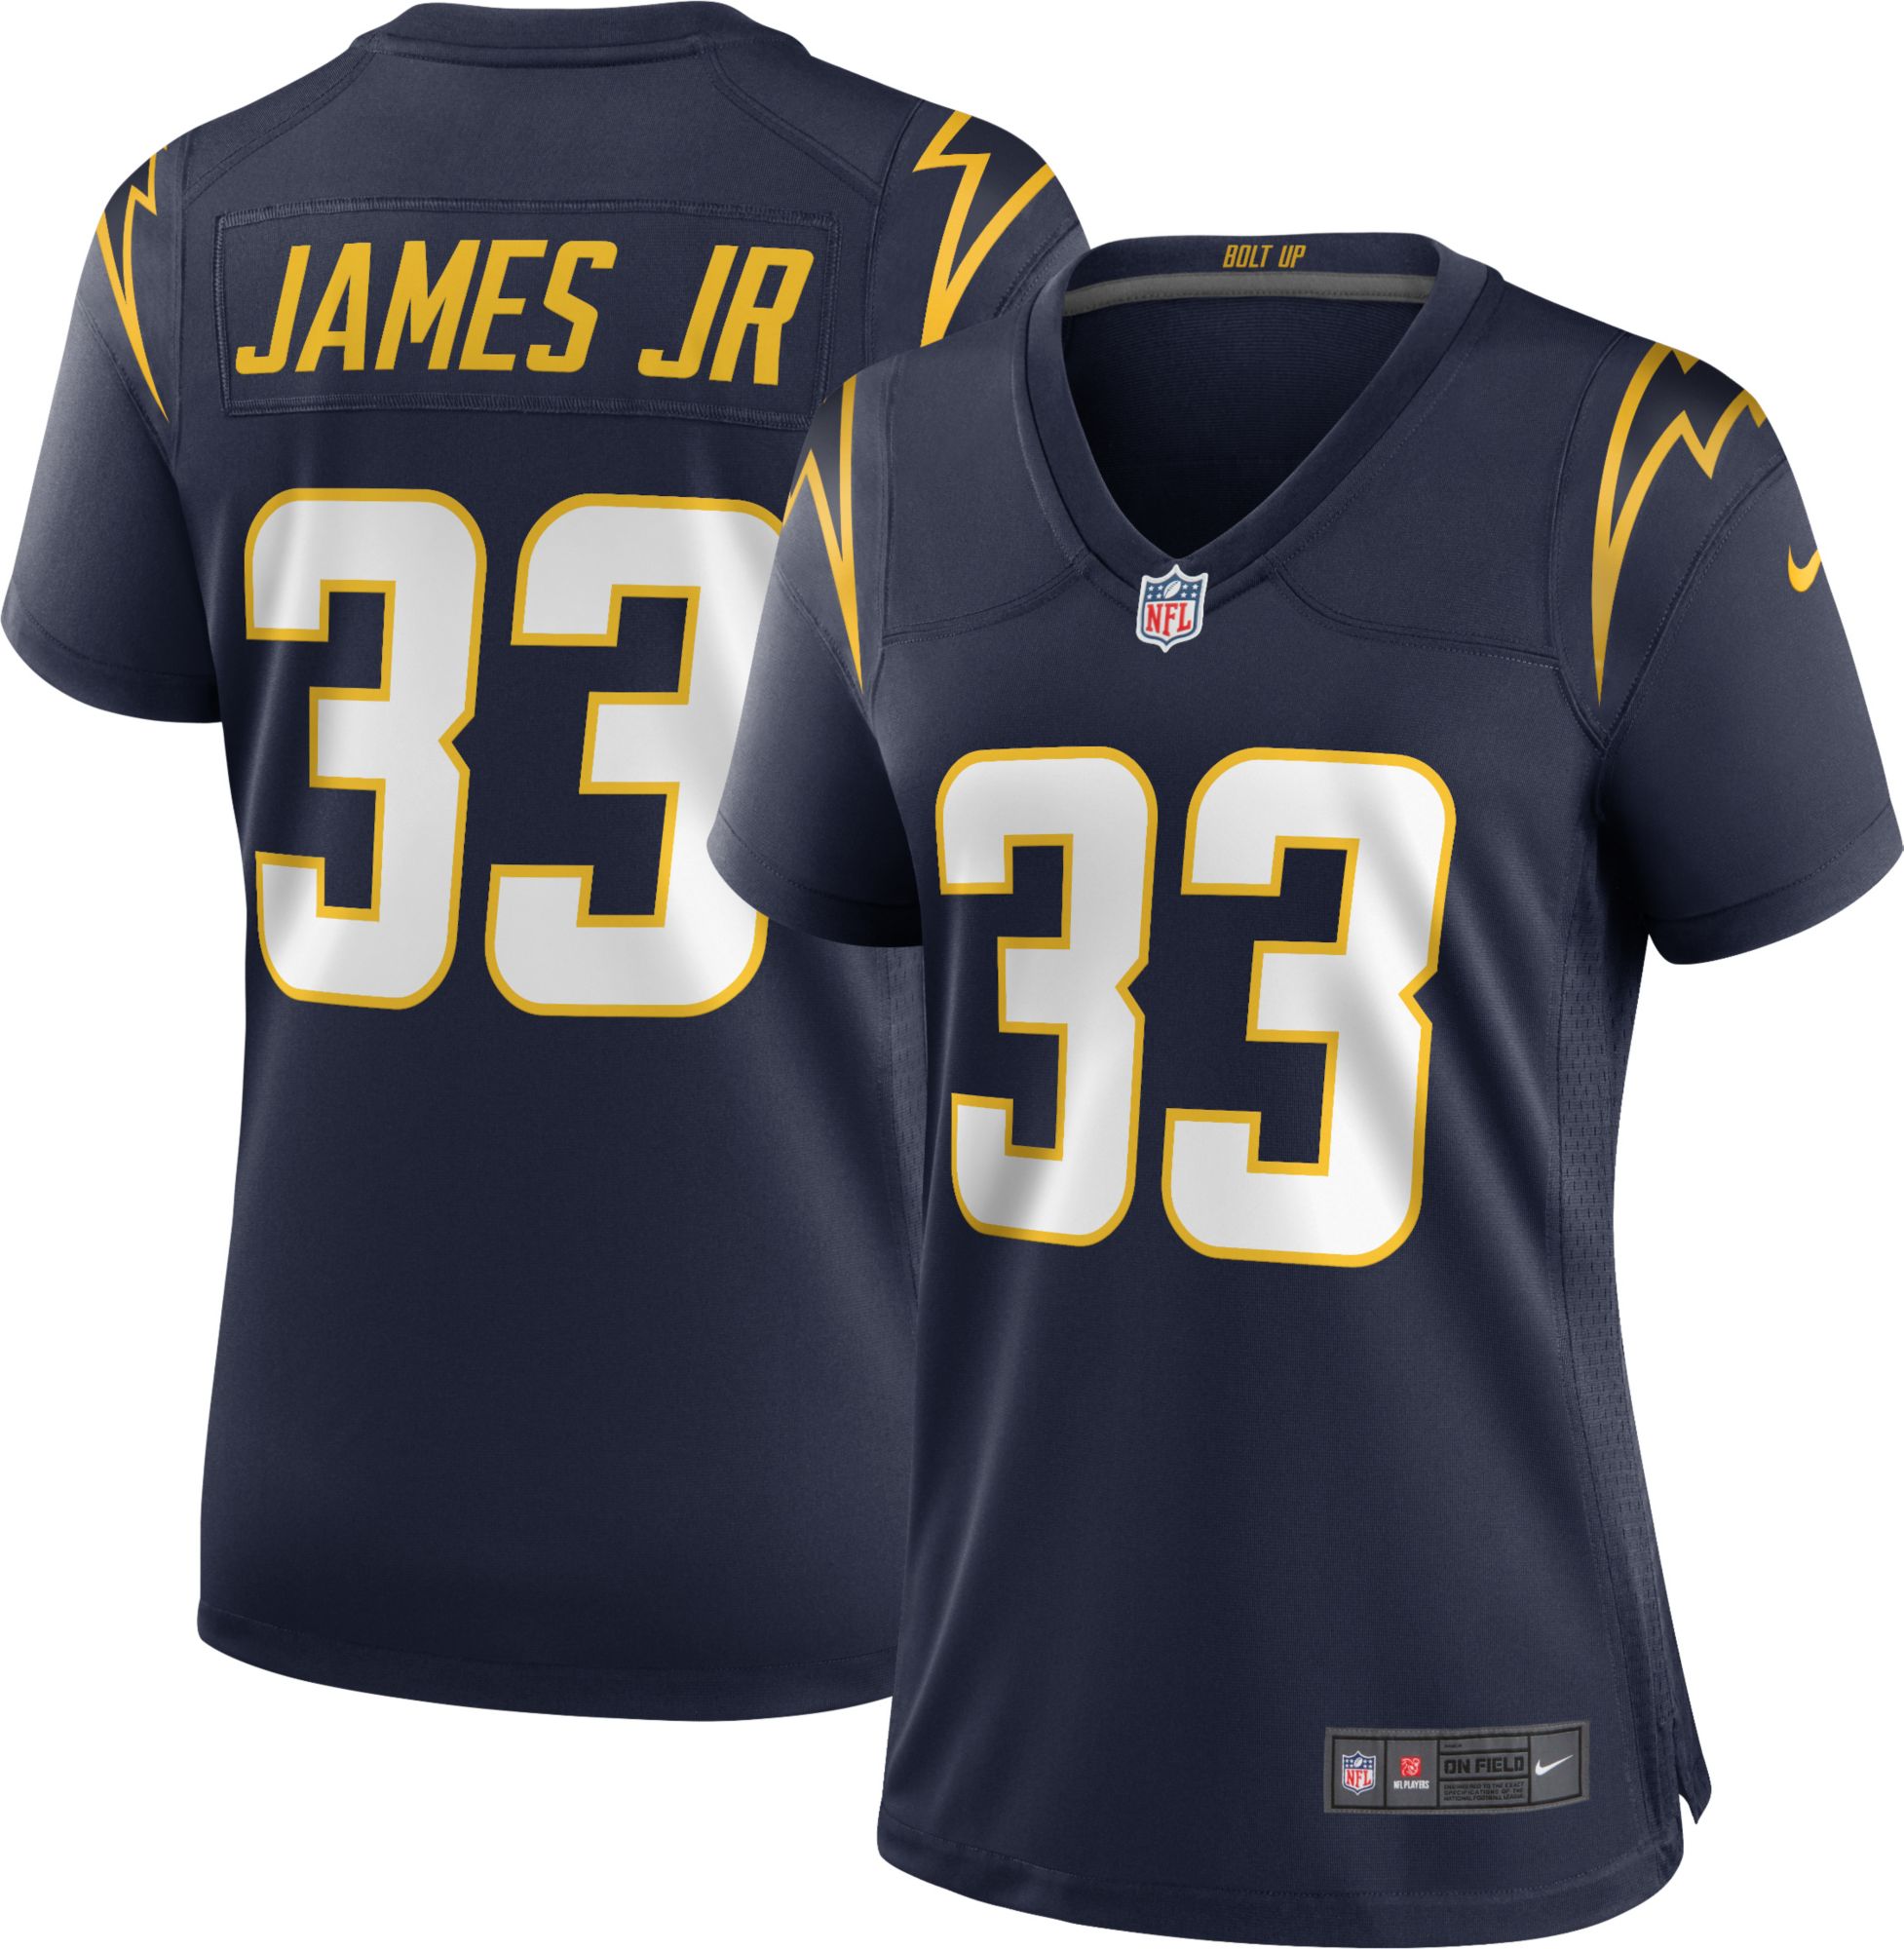 Los Angeles Chargers Derwin James Jr 